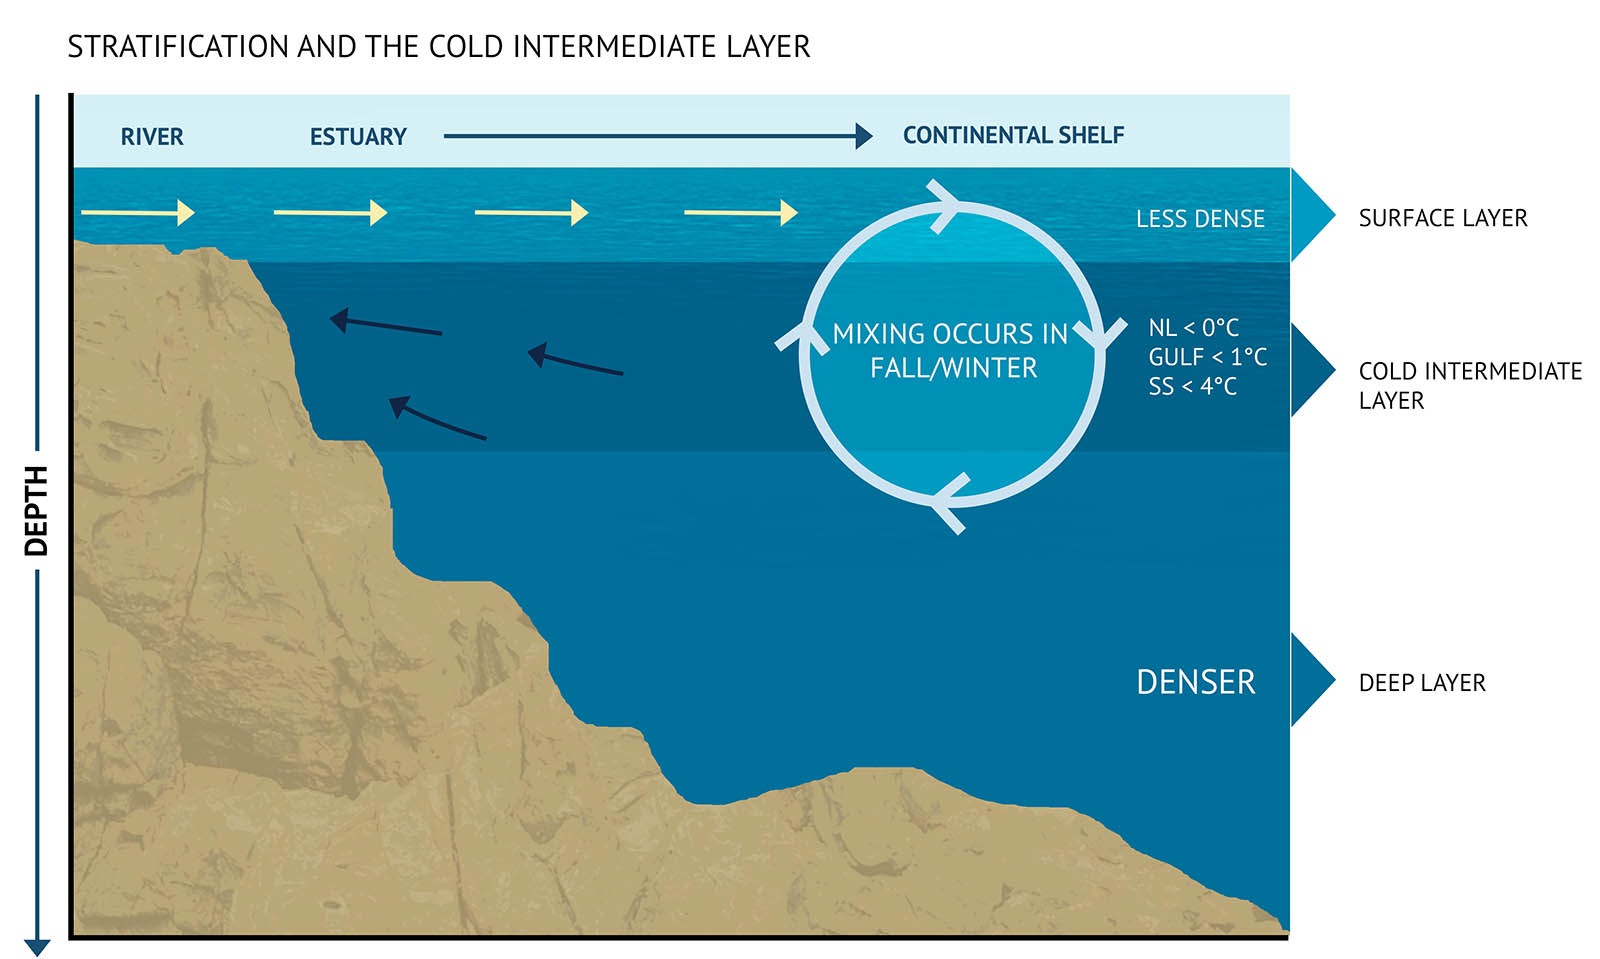 Figure 6 Stratification of the ocean is influenced by temperature, the input of freshwater from land and sea ice melt, and energy for mixing from wind and currents which change seasonally. An illustration shows a cross section view of the ocean, extending from a coastal river to an estuary and out to the continental shelf. Text at the top of the graphic says “Stratification and the cold intermediate layer”. The land is illustrated in a light brown colour. It starts with a flat shelf then slopes out under the water and flattens out again. Three stacked layers of water are shown in different shades of blue. On the left-hand side, an arrow points down with vertical text saying “depth”. The top layer of water is light blue and text on the right-hand side says “less dense”. Outside the graphic on the right, a light blue triangle extends from the top layer to text which says “Surface Layer”. The middle layer is dark blue and on the right-hand side, three lines of text say “NL <0°C”, “Gulf <1°C”, and “SS<4°C”. Outside the graphic on the right, a dark blue triangle extends from the middle layer to text which says “Cold Intermediate Layer”. The bottom layer near the ocean floor is blue and text on the right-hand side says “Denser”. Outside the graphic on the right, a blue triangle extends from the top layer to text which says “Deep Layer”. From the left-hand side and extending towards the centre of the surface layer, four arrows point to the right. In the middle layer, on the left-hand side, three black arrows point upwards on an angle to the left. On the right-hand side of the graphic, overlapping the top, middle and bottom layers, there is a circle made of three arrows going clockwise. Text in the circle reads “Mixing occurs in fall/winter”.